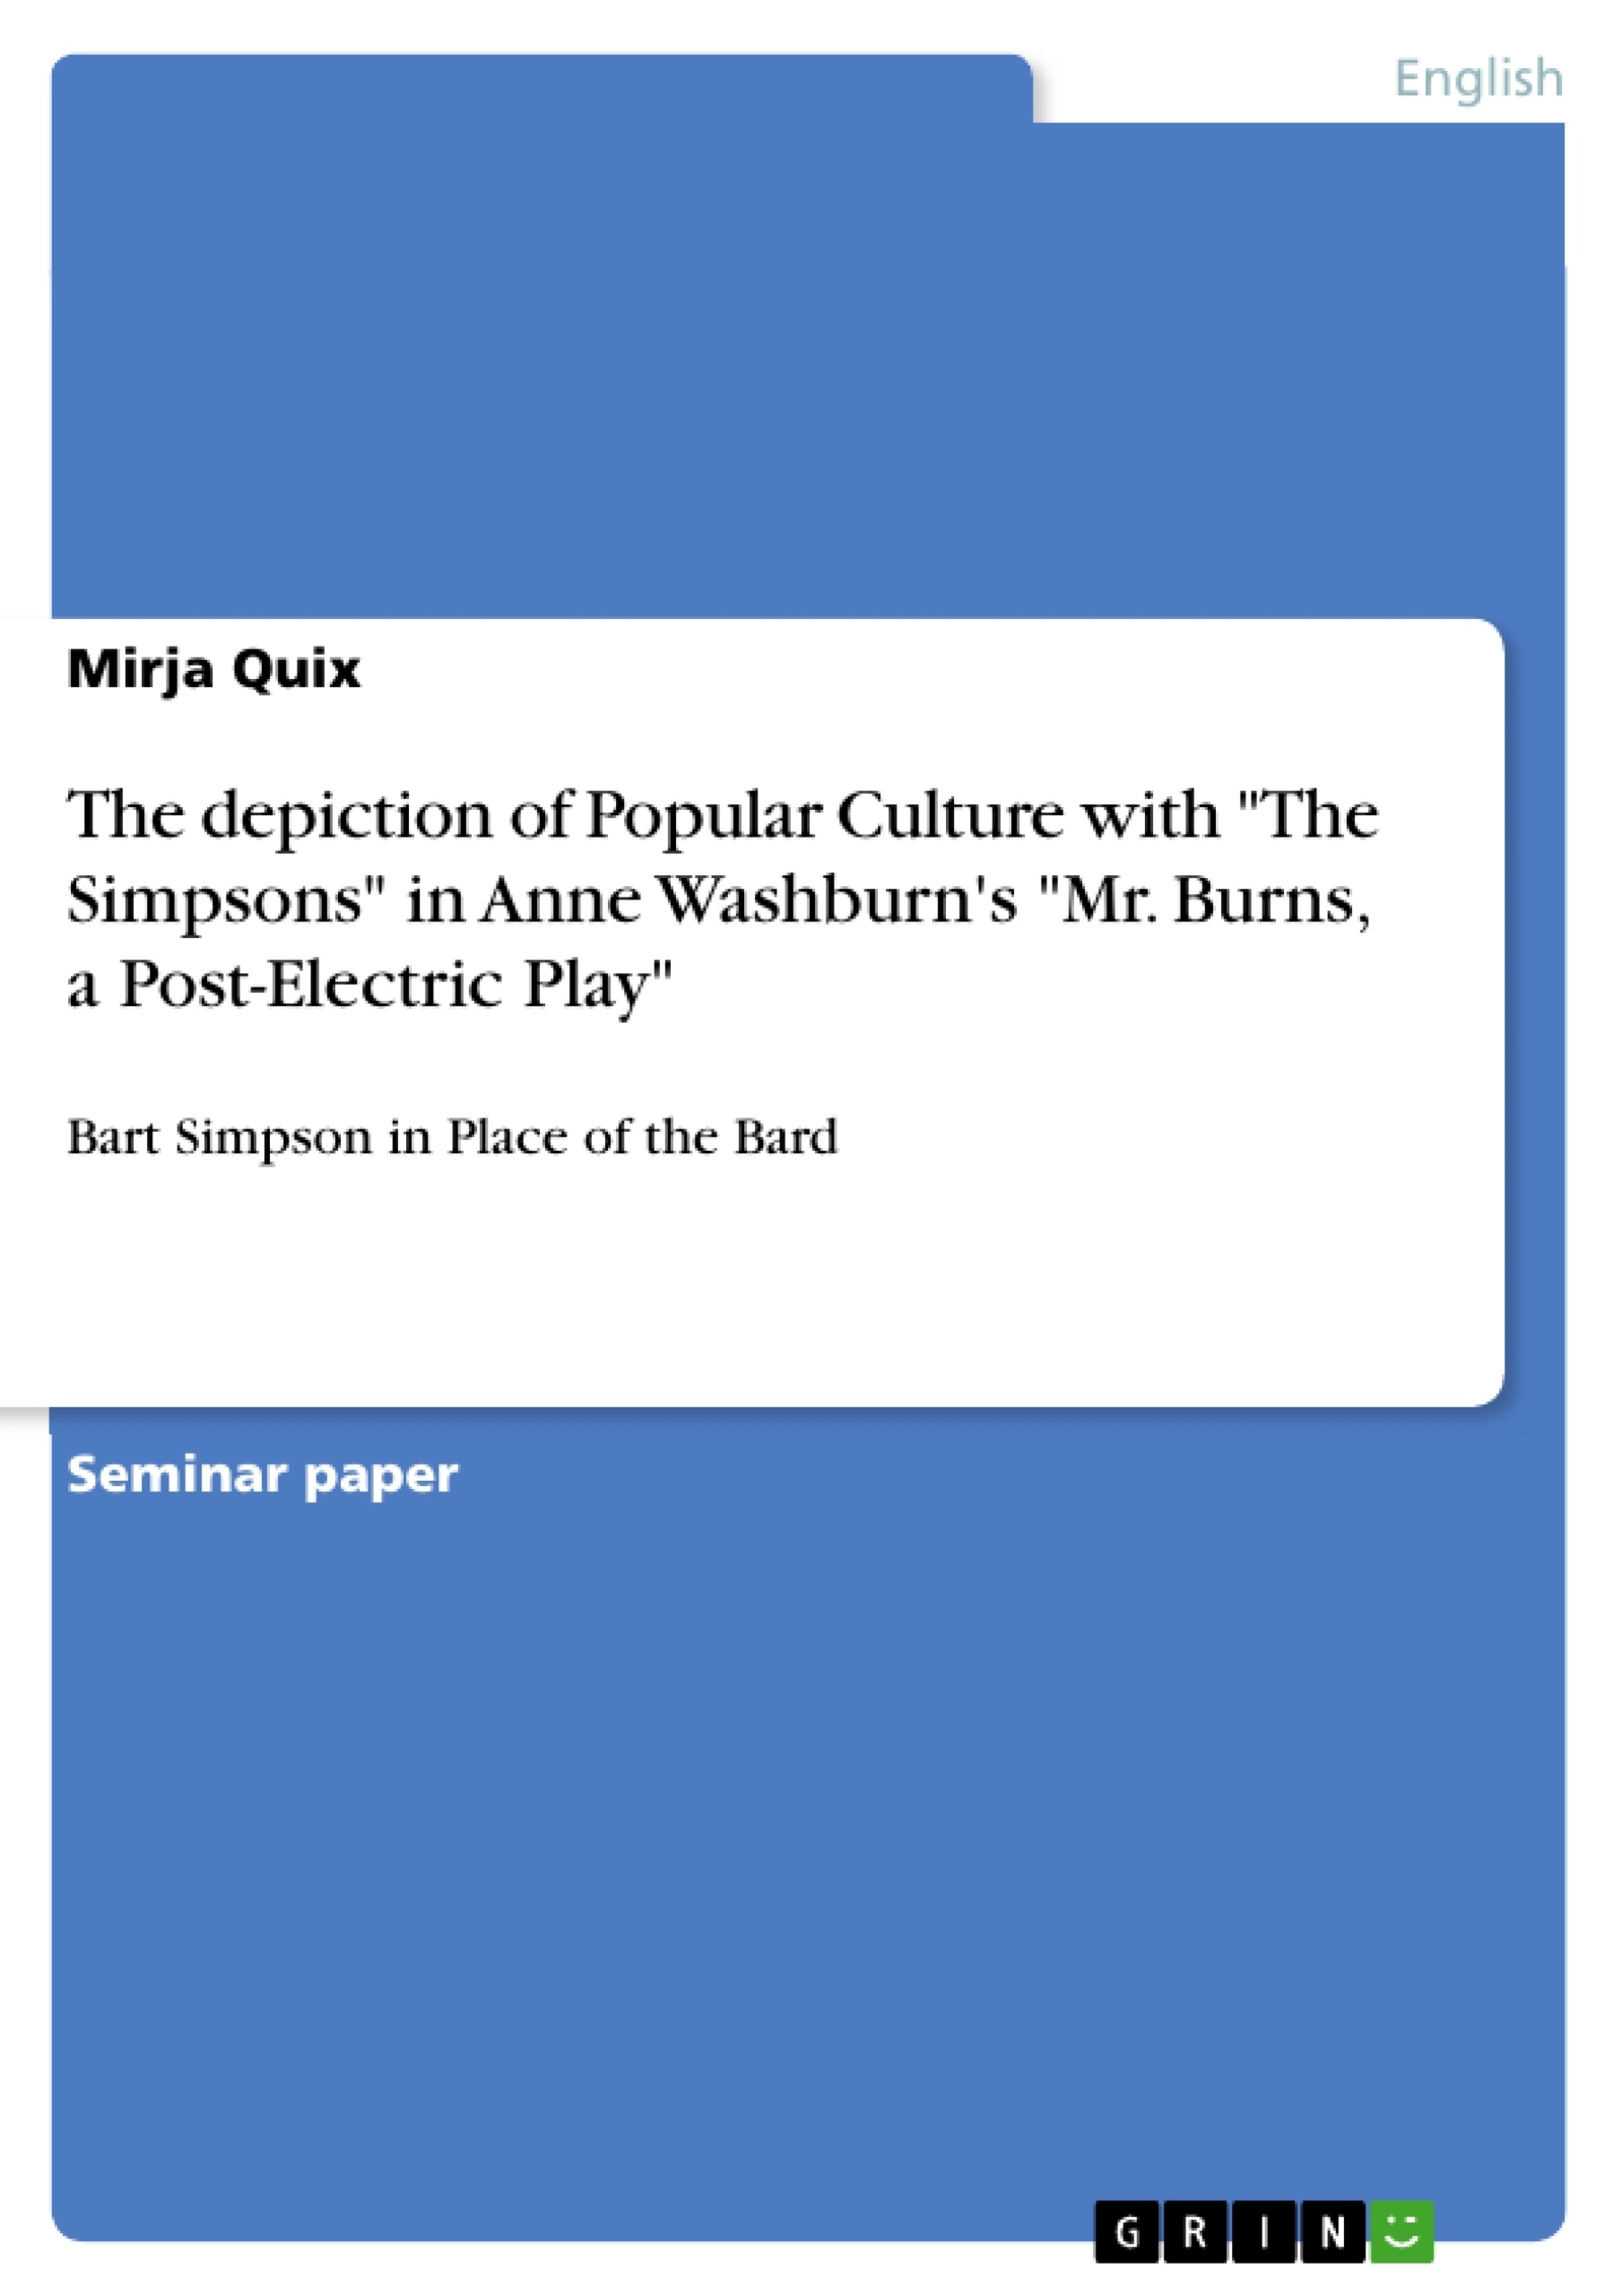 Titel: The depiction of Popular Culture with "The Simpsons" in Anne Washburn's "Mr. Burns, a Post-Electric Play"